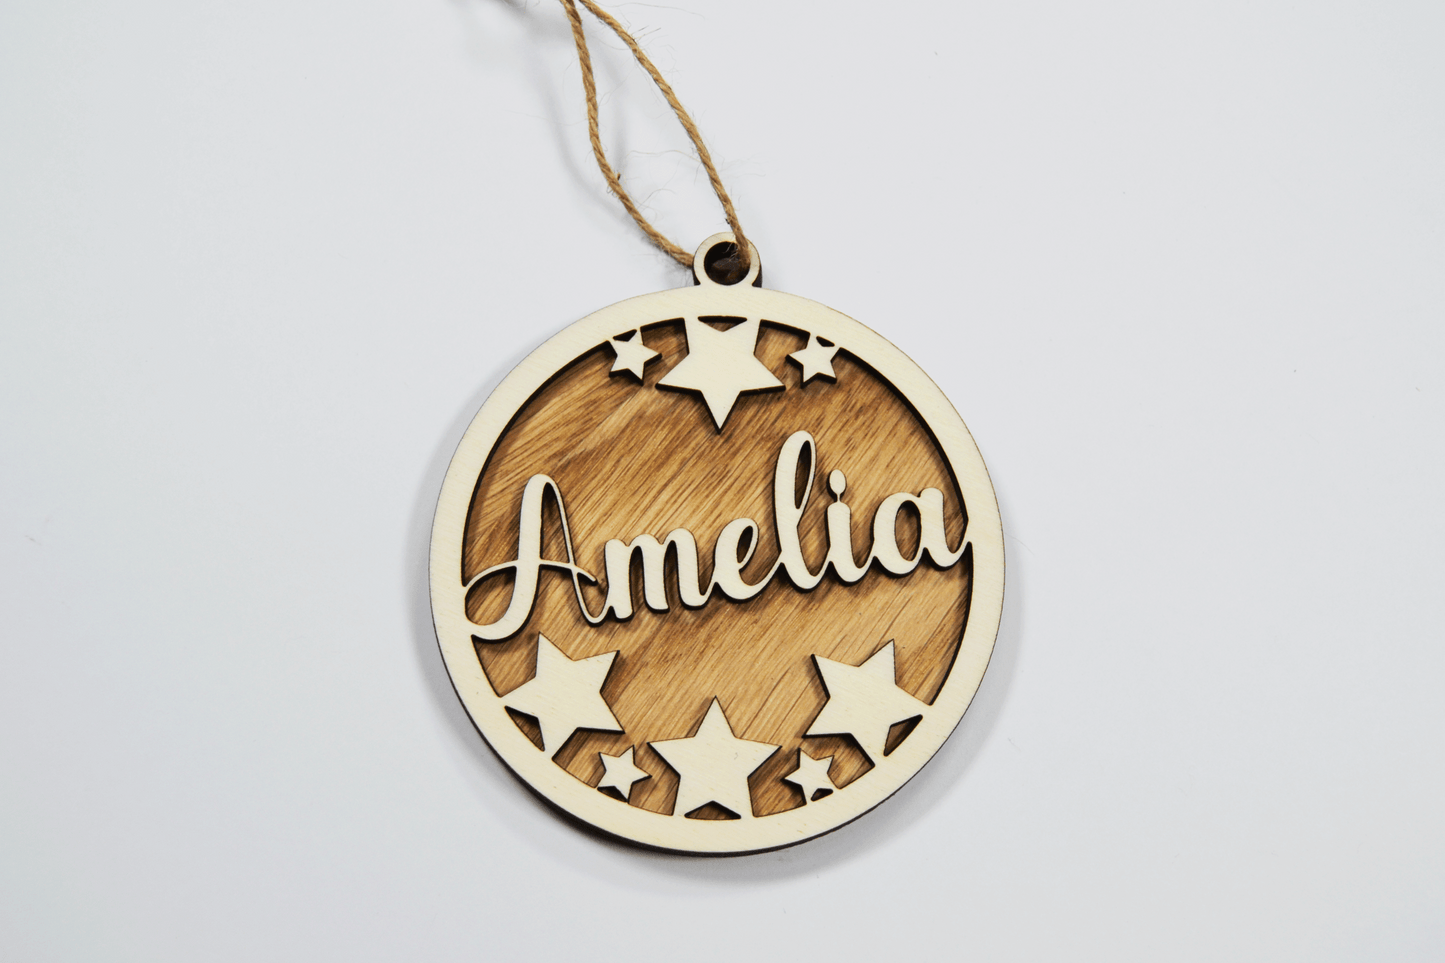 Personalised star gift tag - Luxury wooden gift tag